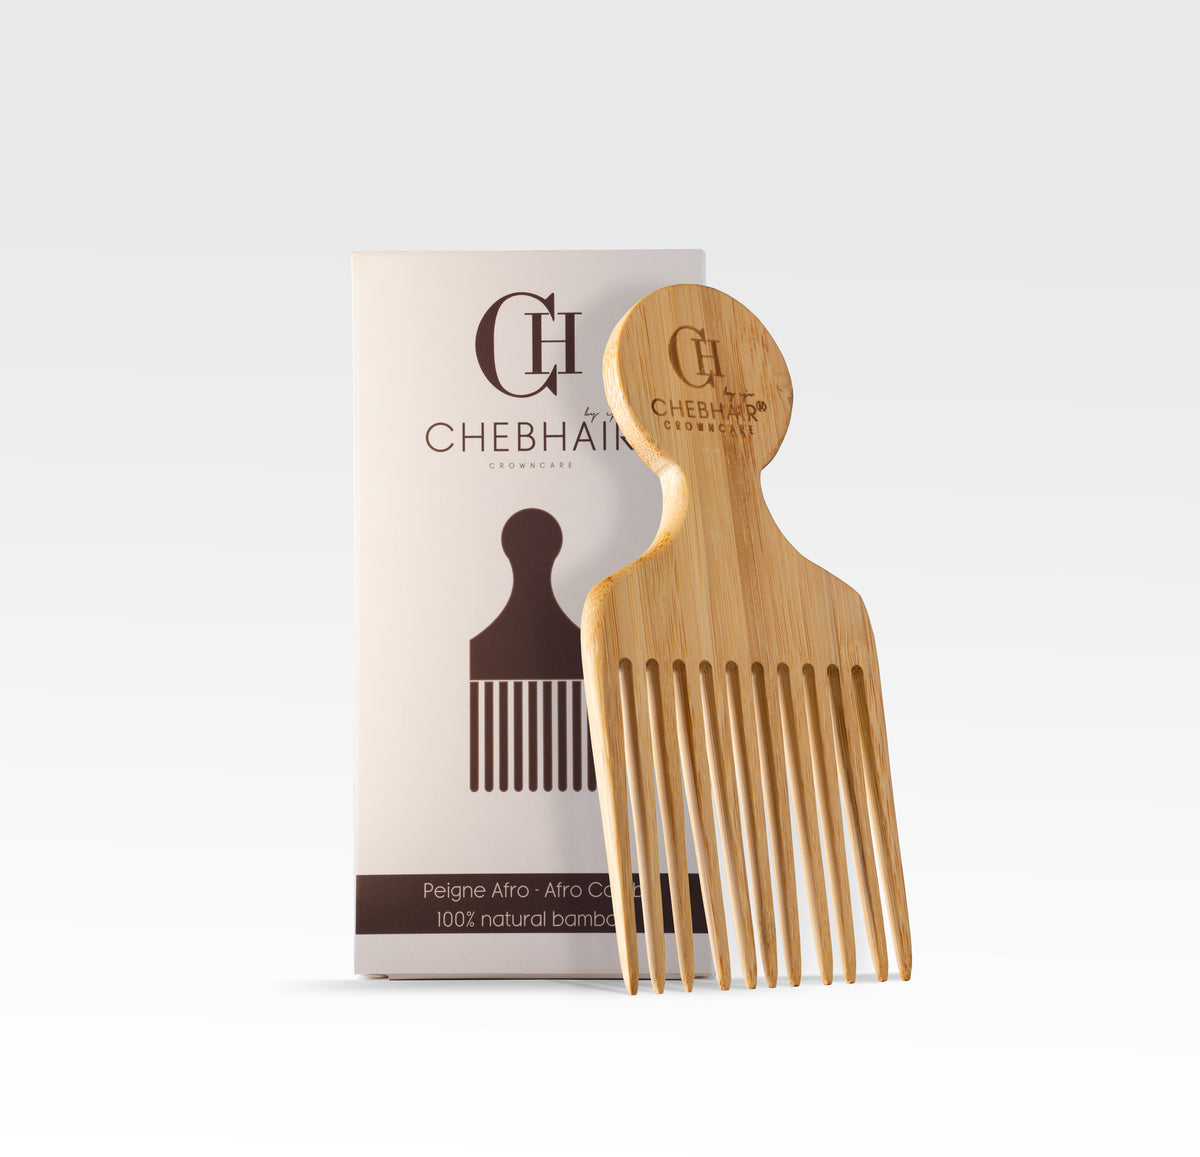 ChebHair bamboo comb (old logo)